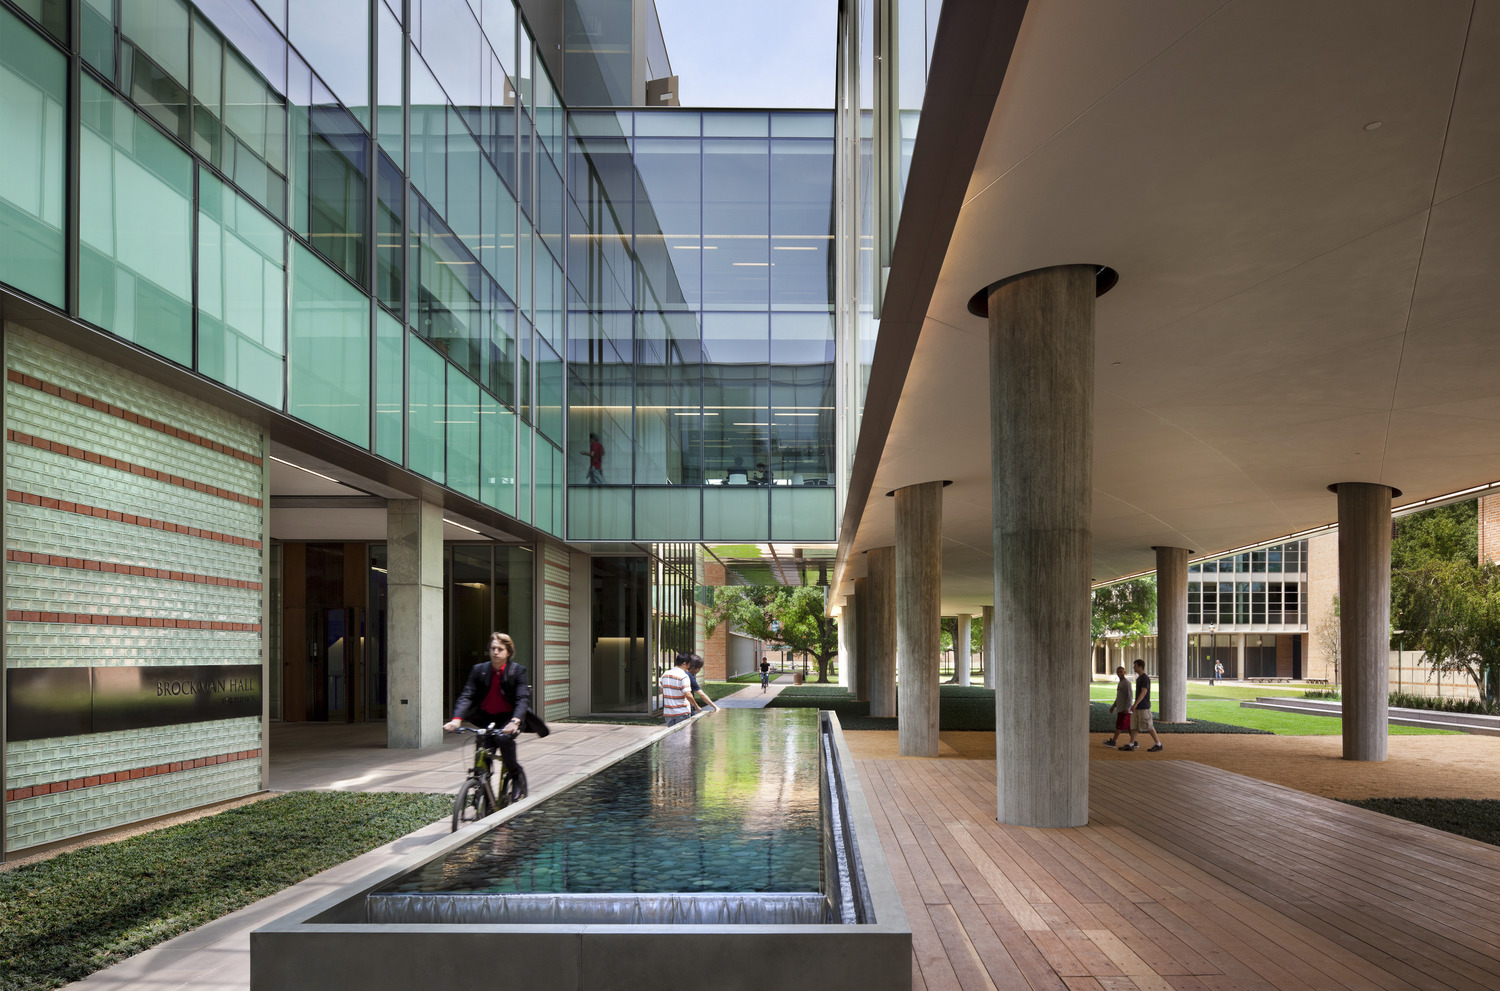 <p>Several outdoor seating areas and a water feature encourage Rice University students and faculty members to linger in the shade of the buildings, extending the use of outdoor space in a hot climate. | <small>&copy; Peter Aaron/OTTO</small></p>